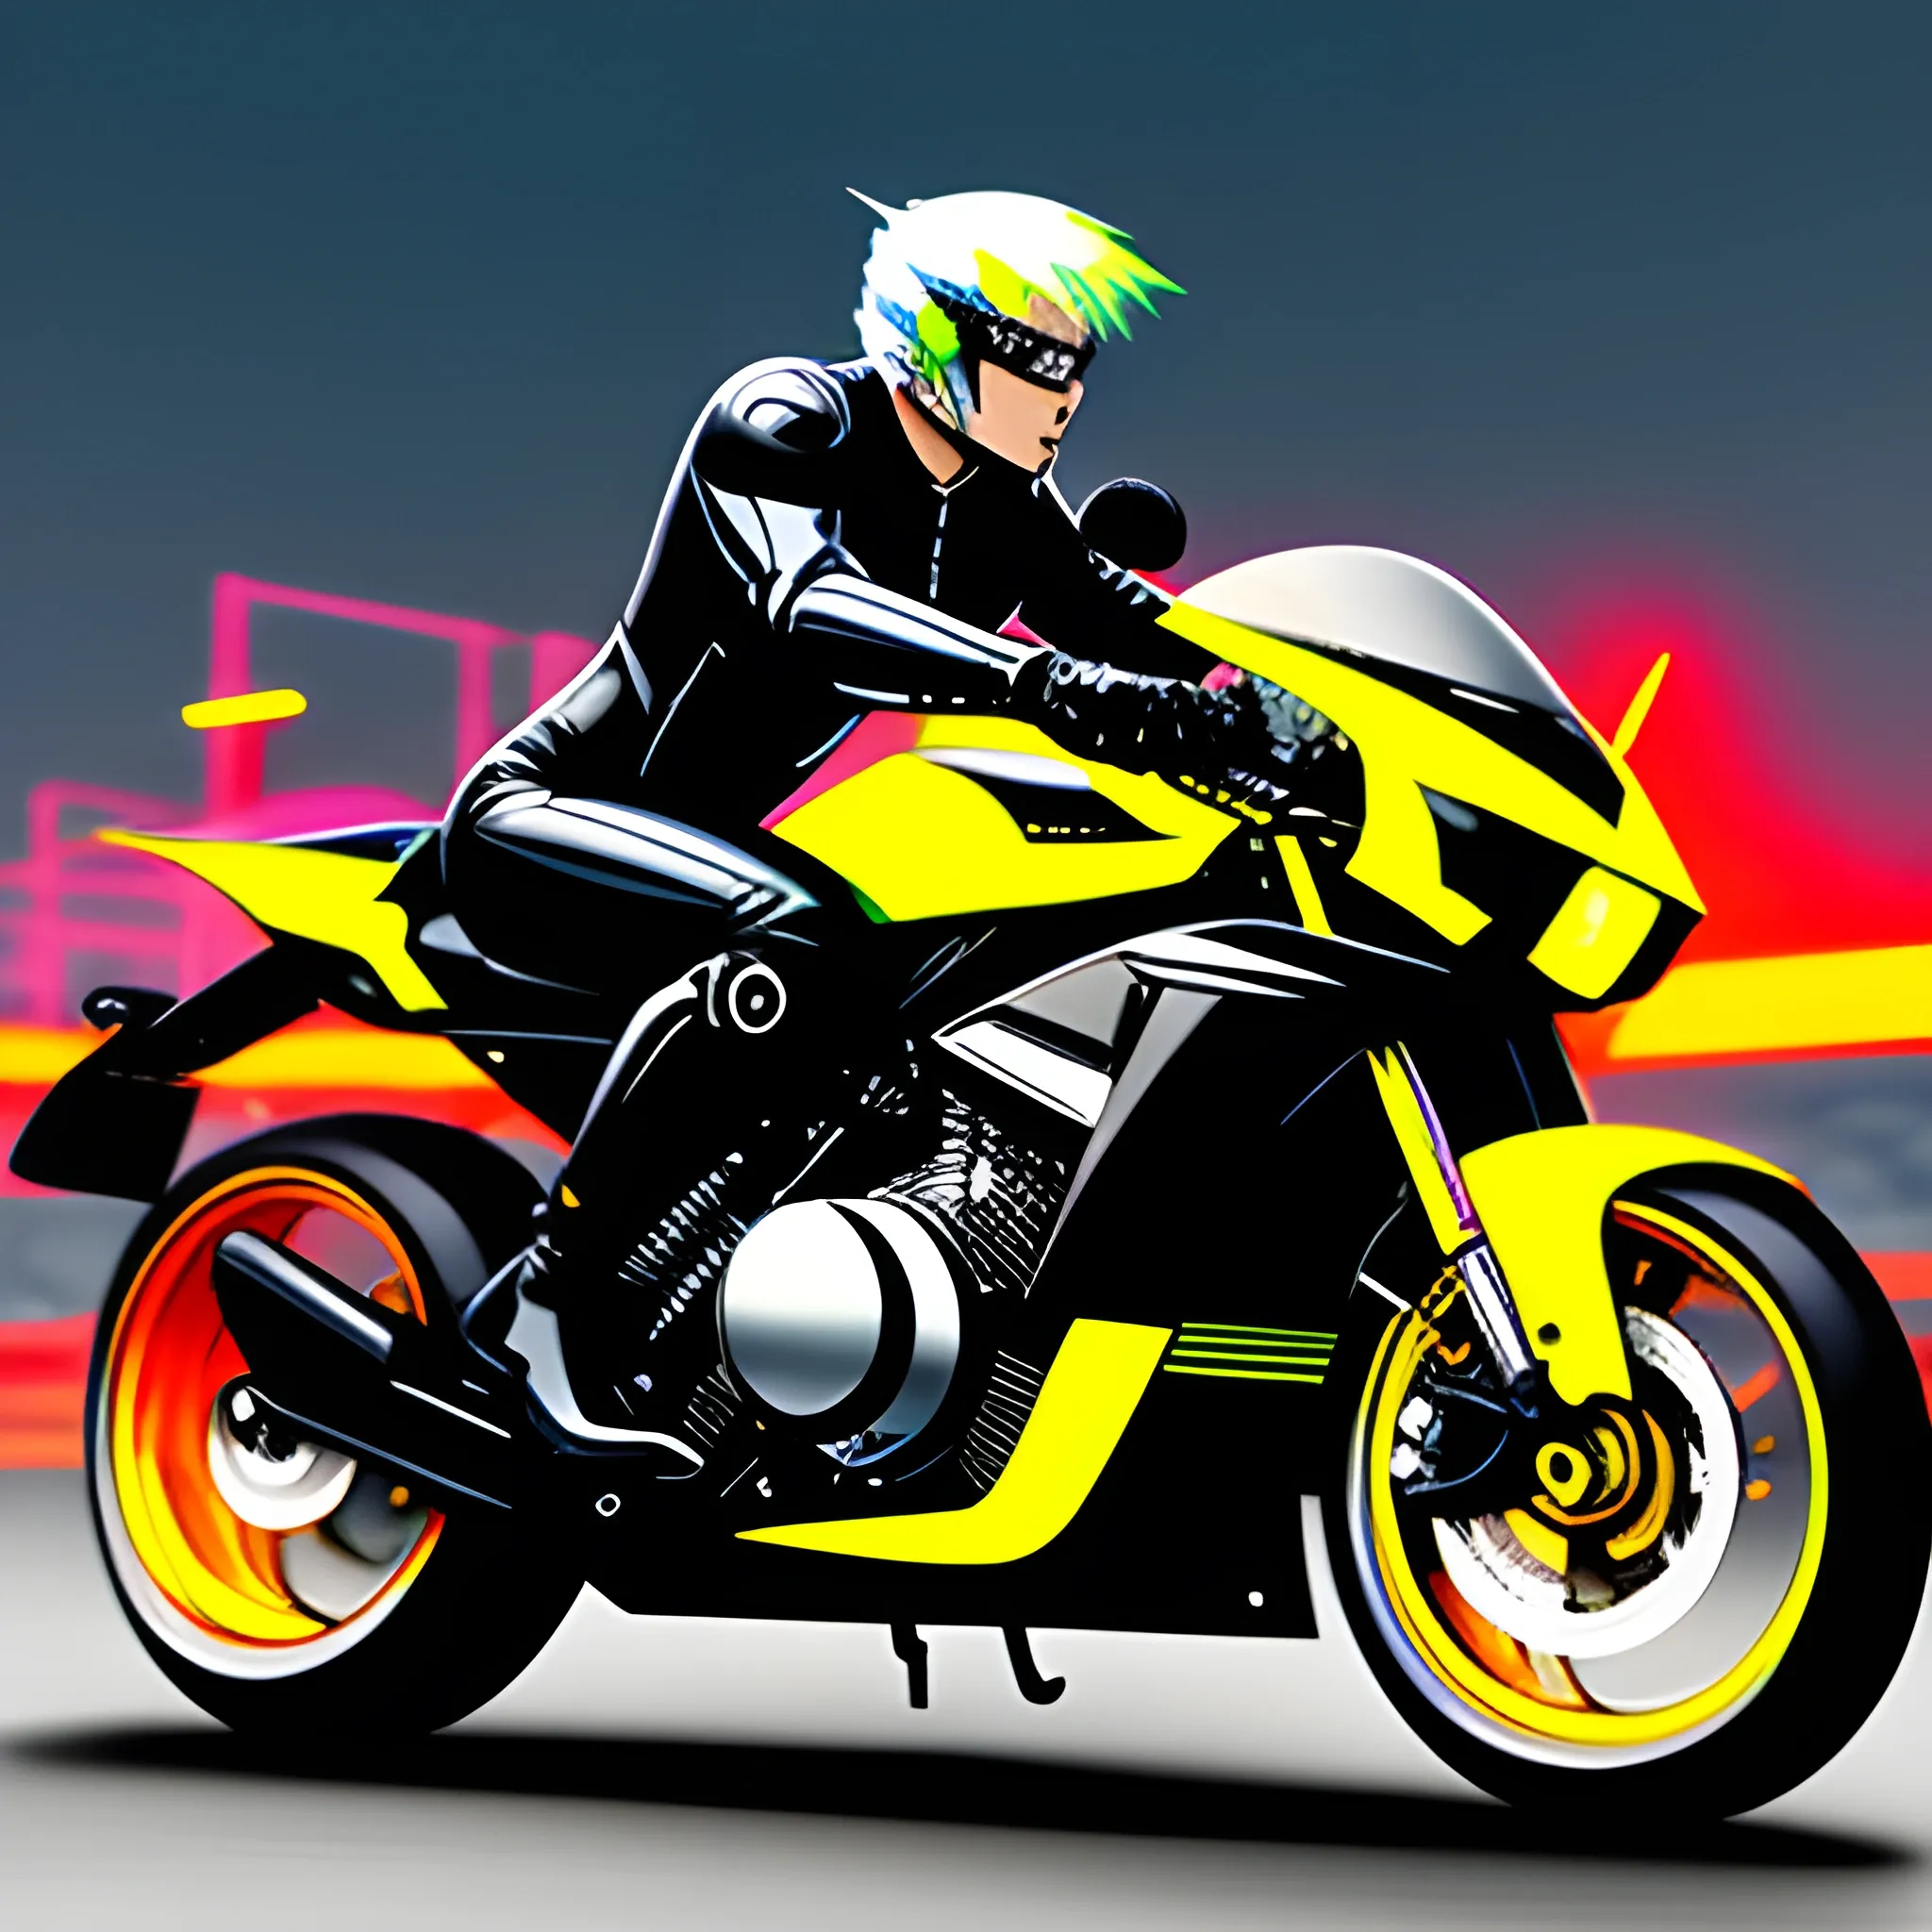 Honda Goes Full-Blown Anime With Its Latest Bonkers Bike | WIRED